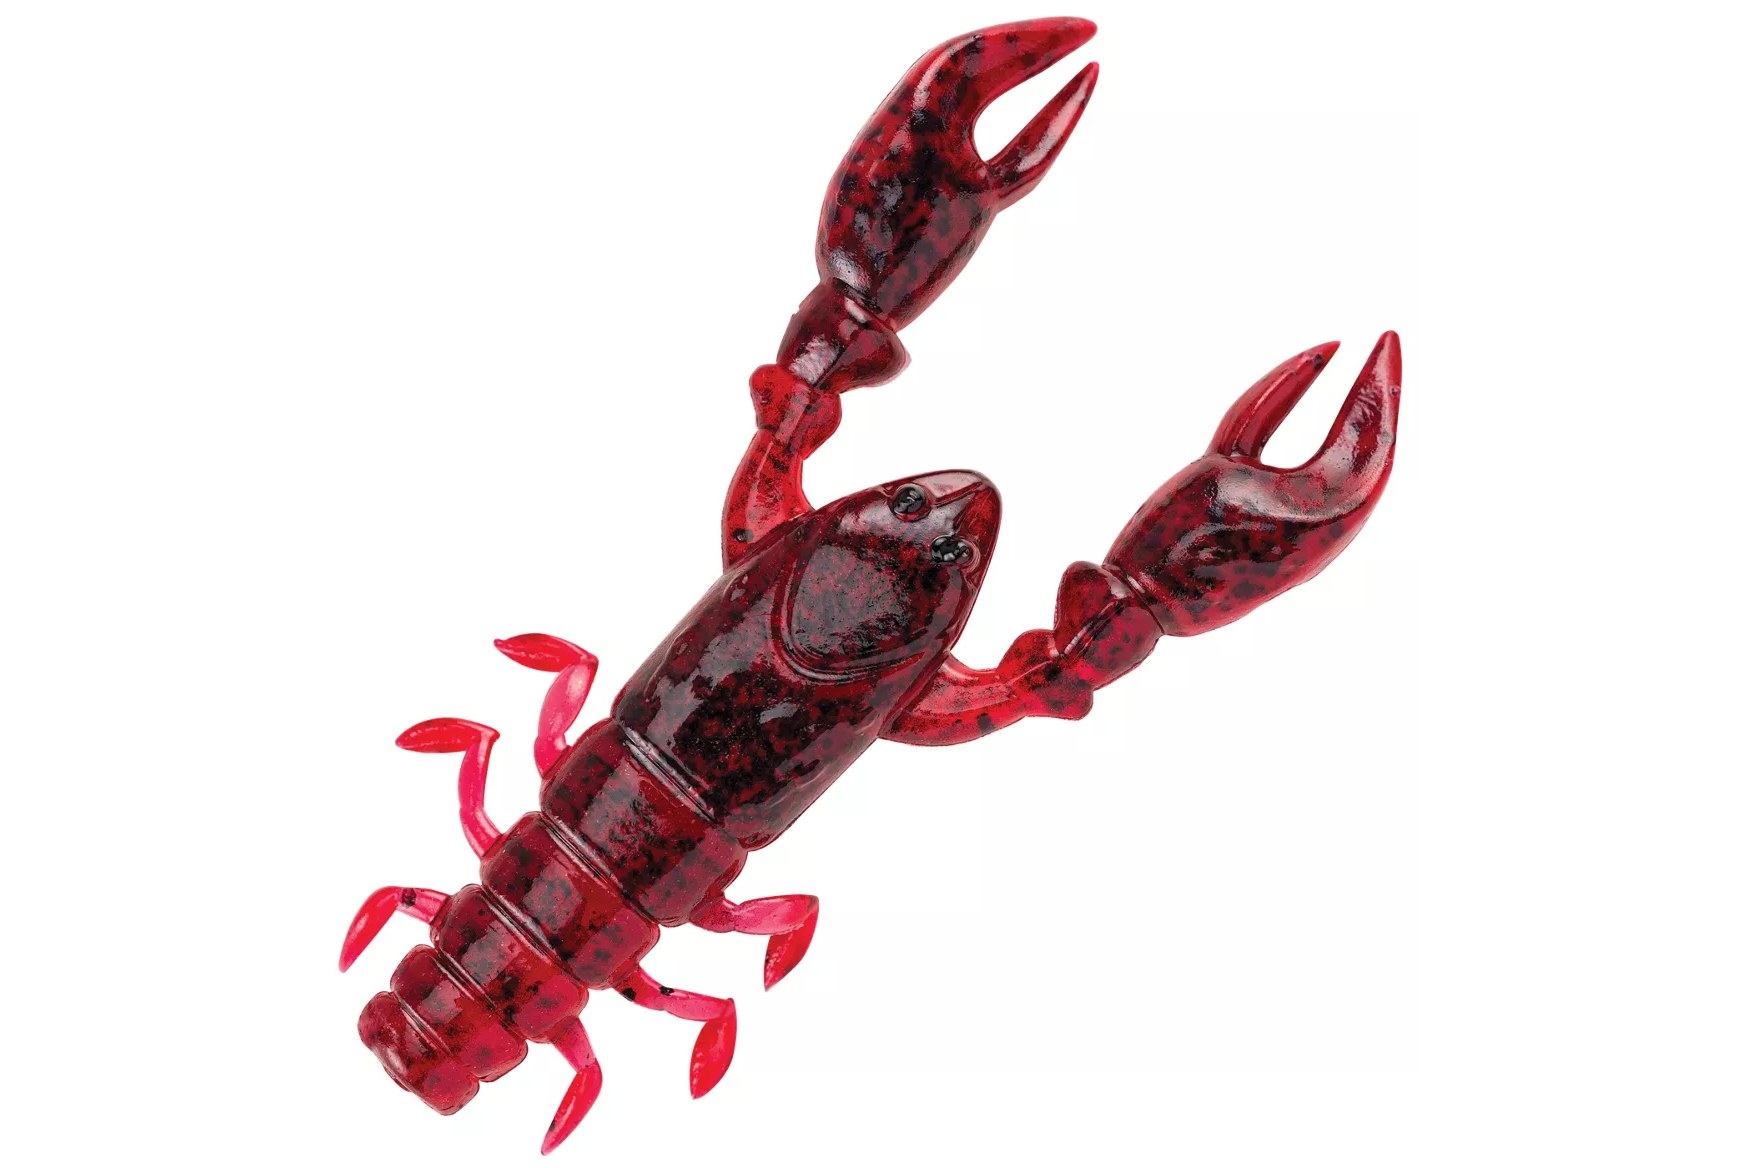 The red lobster shaped bait 